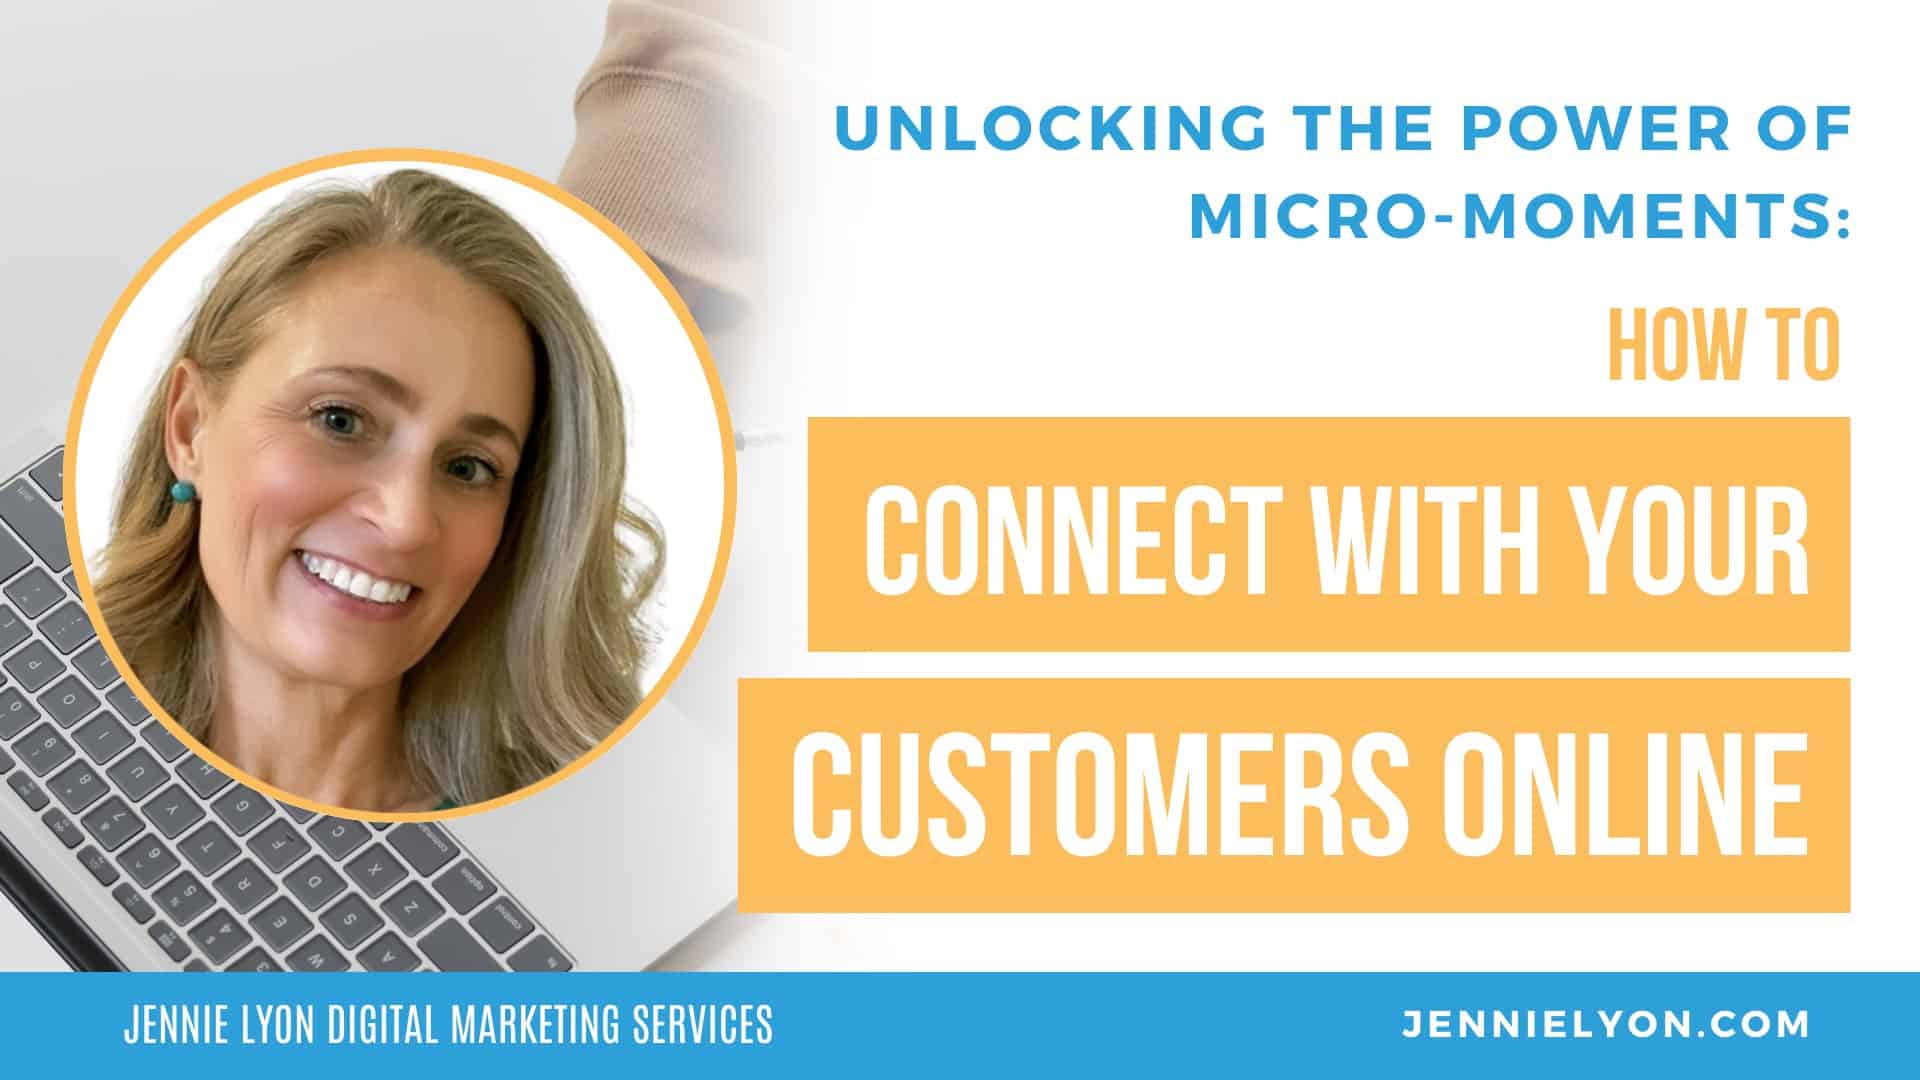 How to Leverage the Power of Micro-Moments for a Winning Online Marketing Strategy